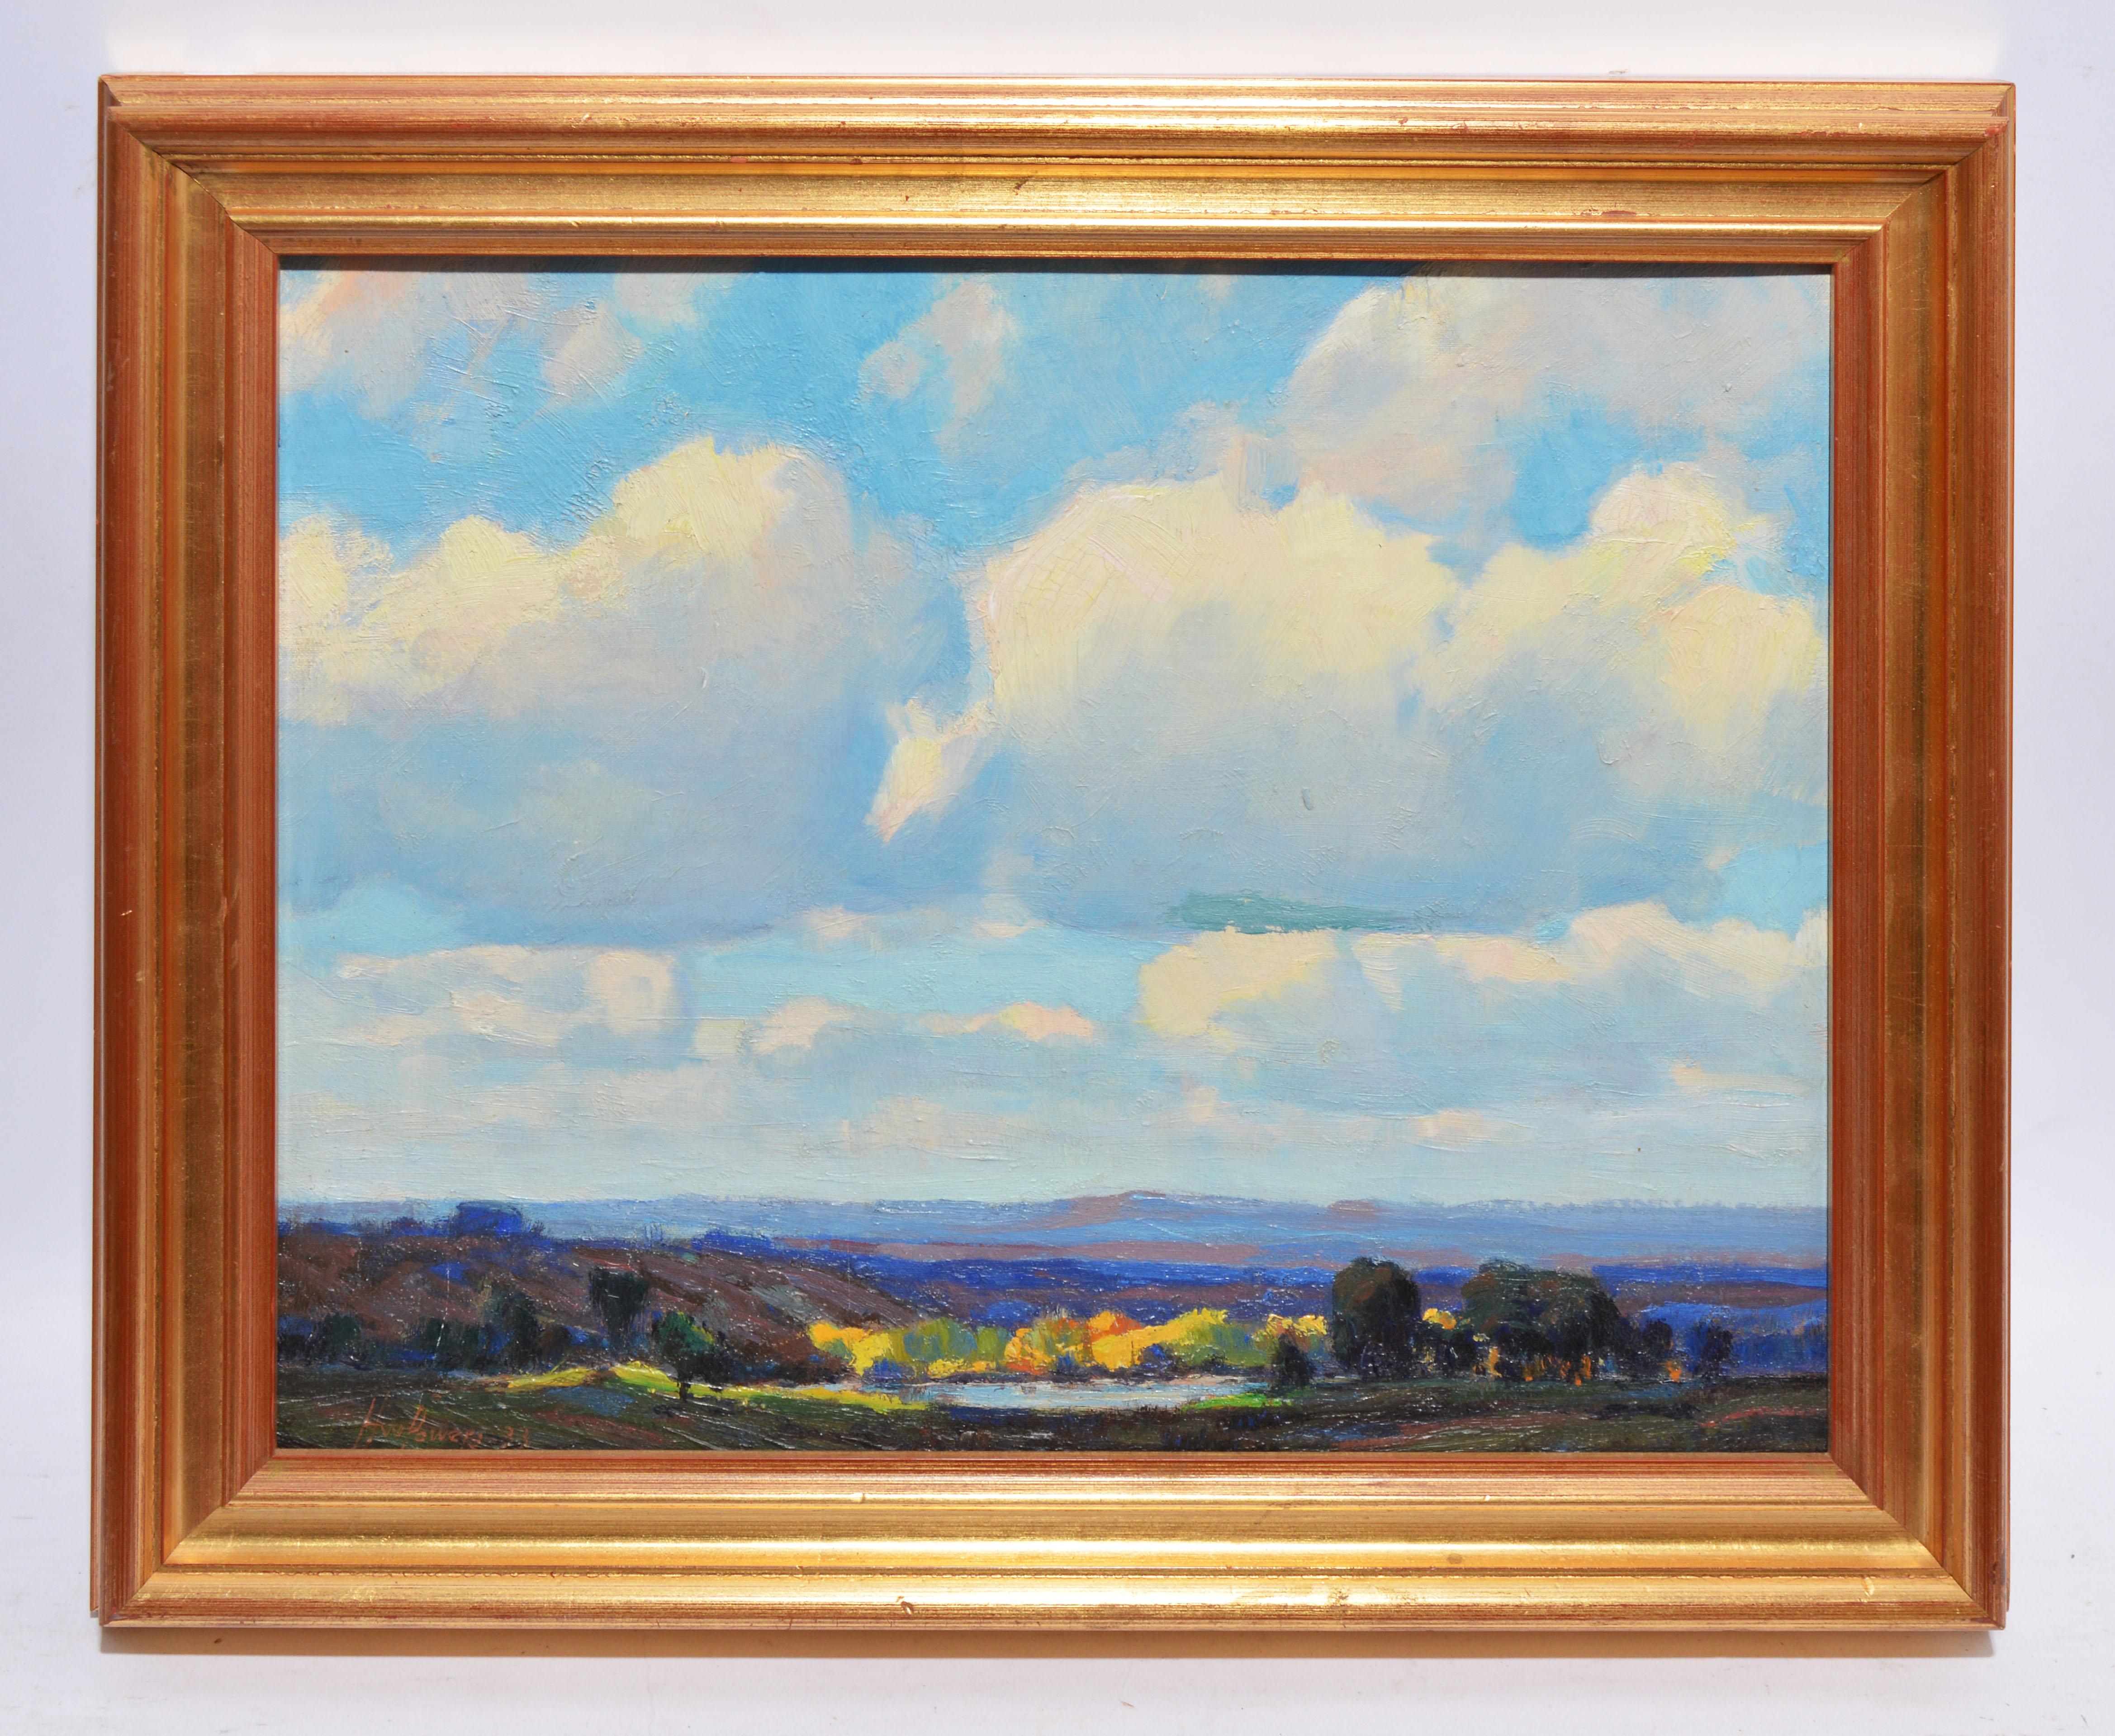 Antique American Impressionist Panoramic Landscape Oil Painting by Harry Powers (Grau), Landscape Painting, von Harry William Powers